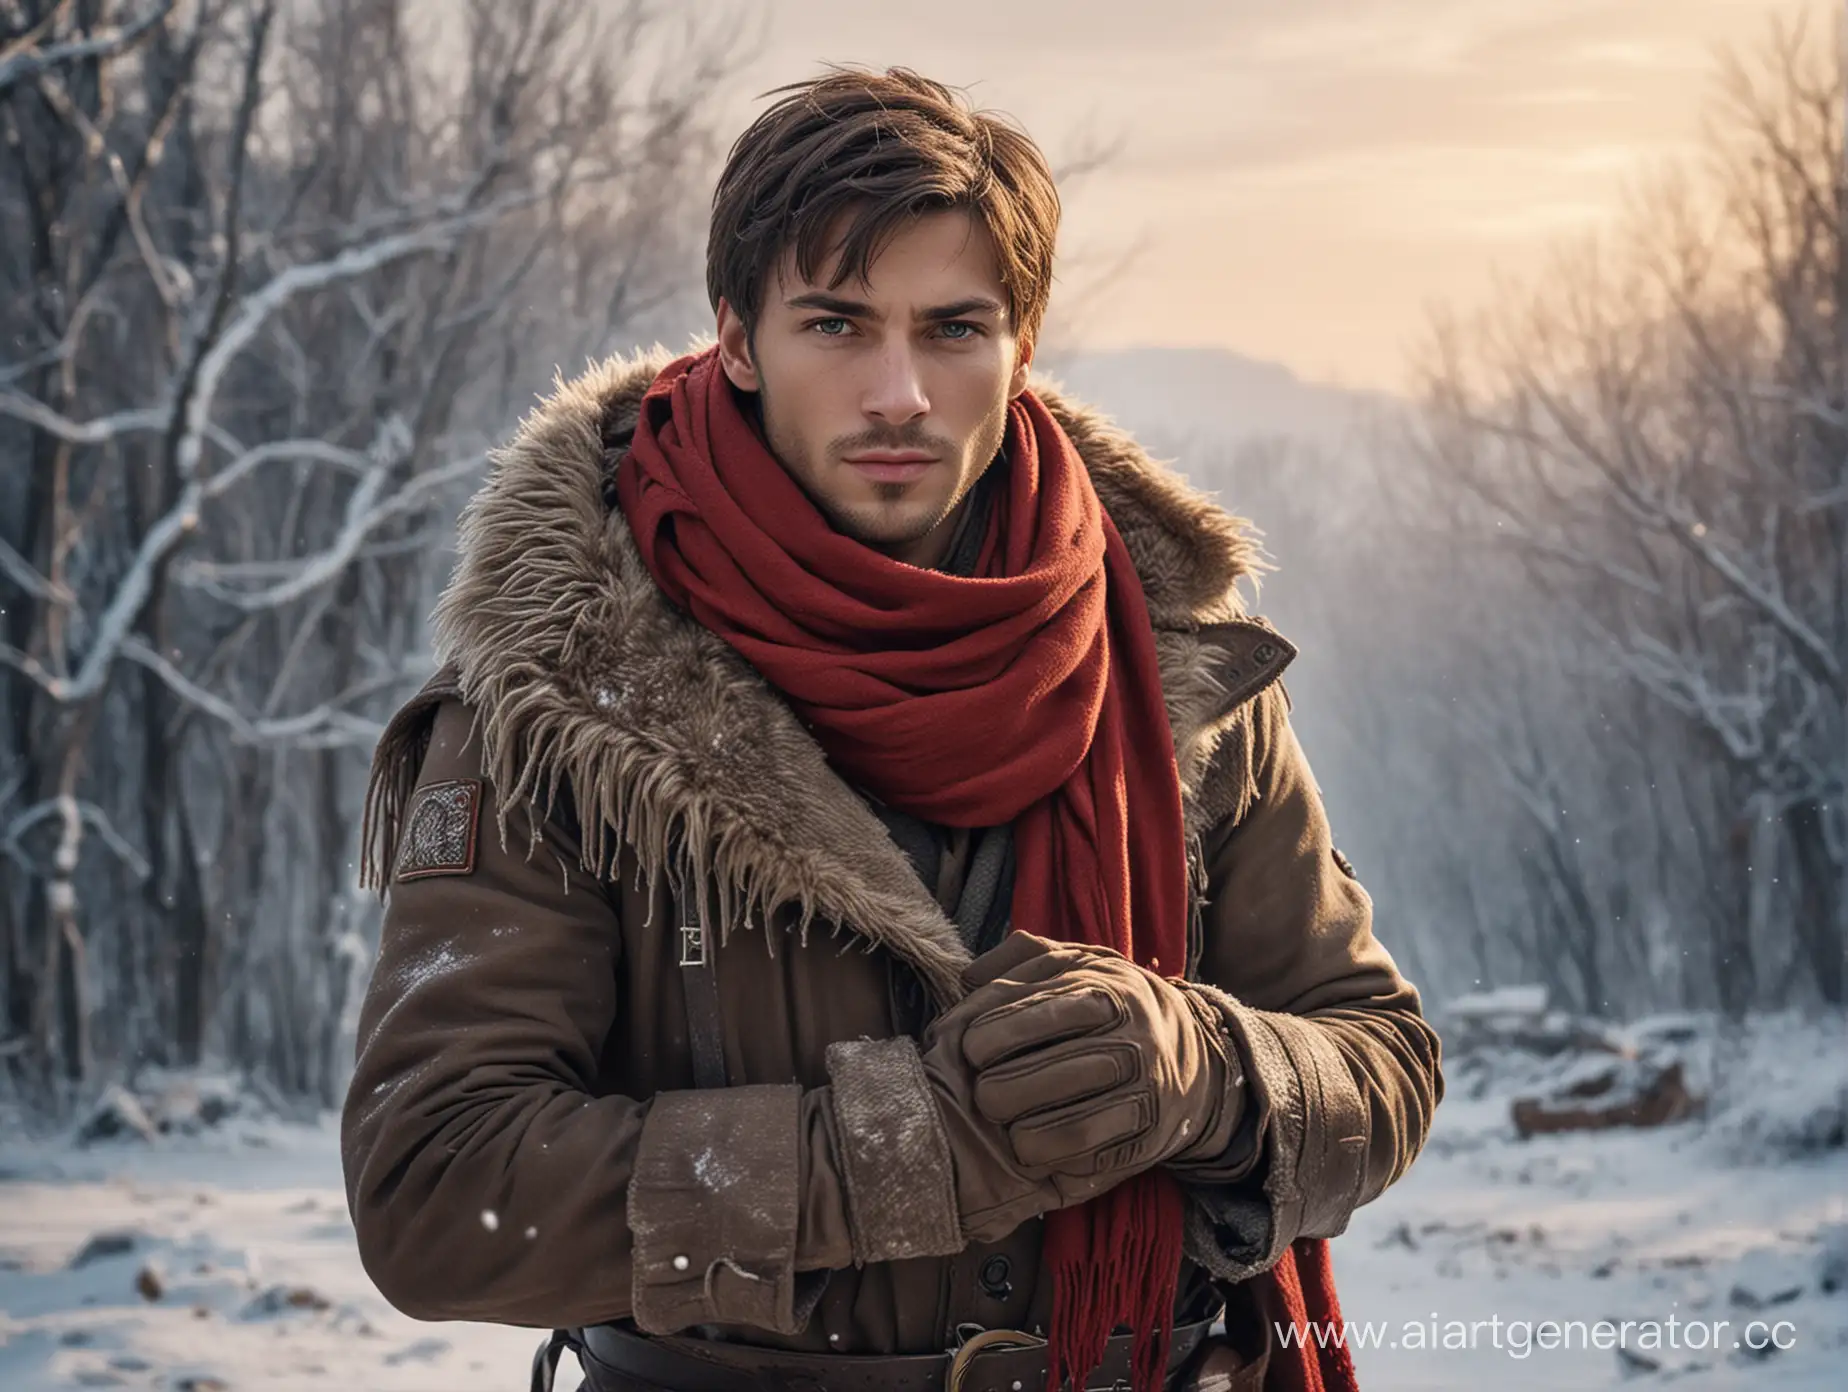 SovietStyle-Winter-Soldier-Tall-BrownEyed-Male-with-Red-Scarf-and-Frostbite-Scar